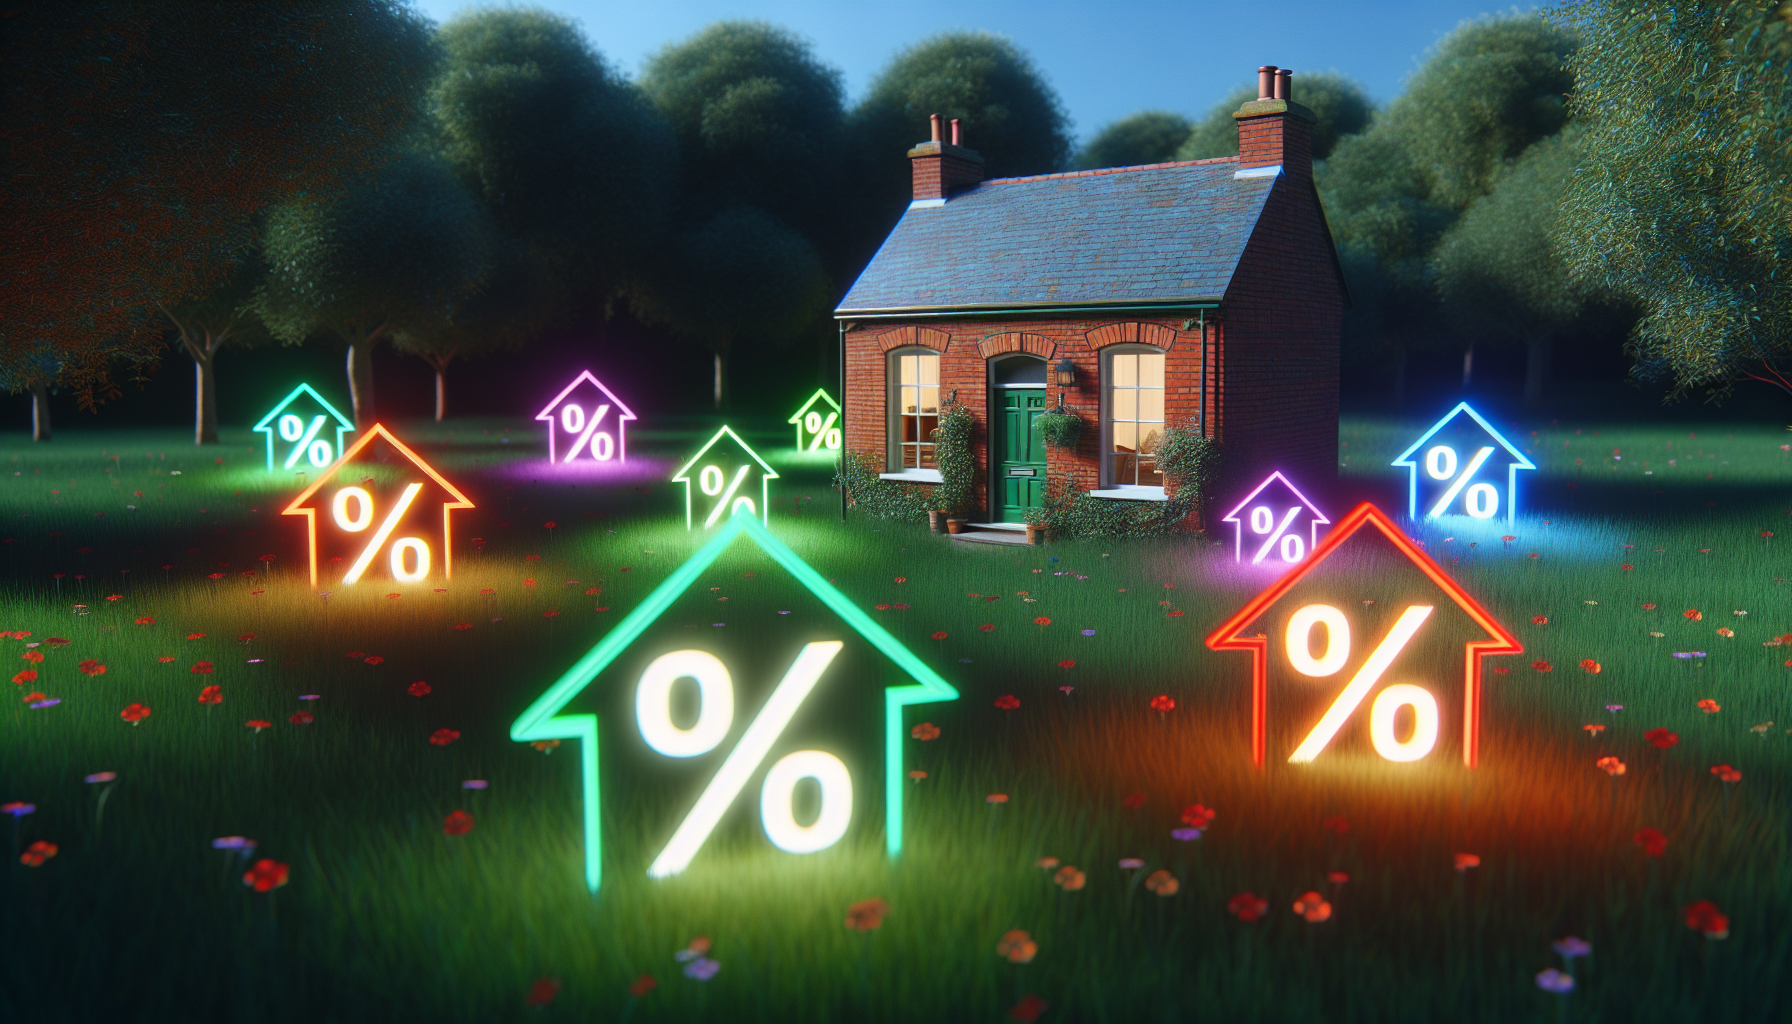 Illustration of a house with a percentage sign to represent stamp duty rates for second homes